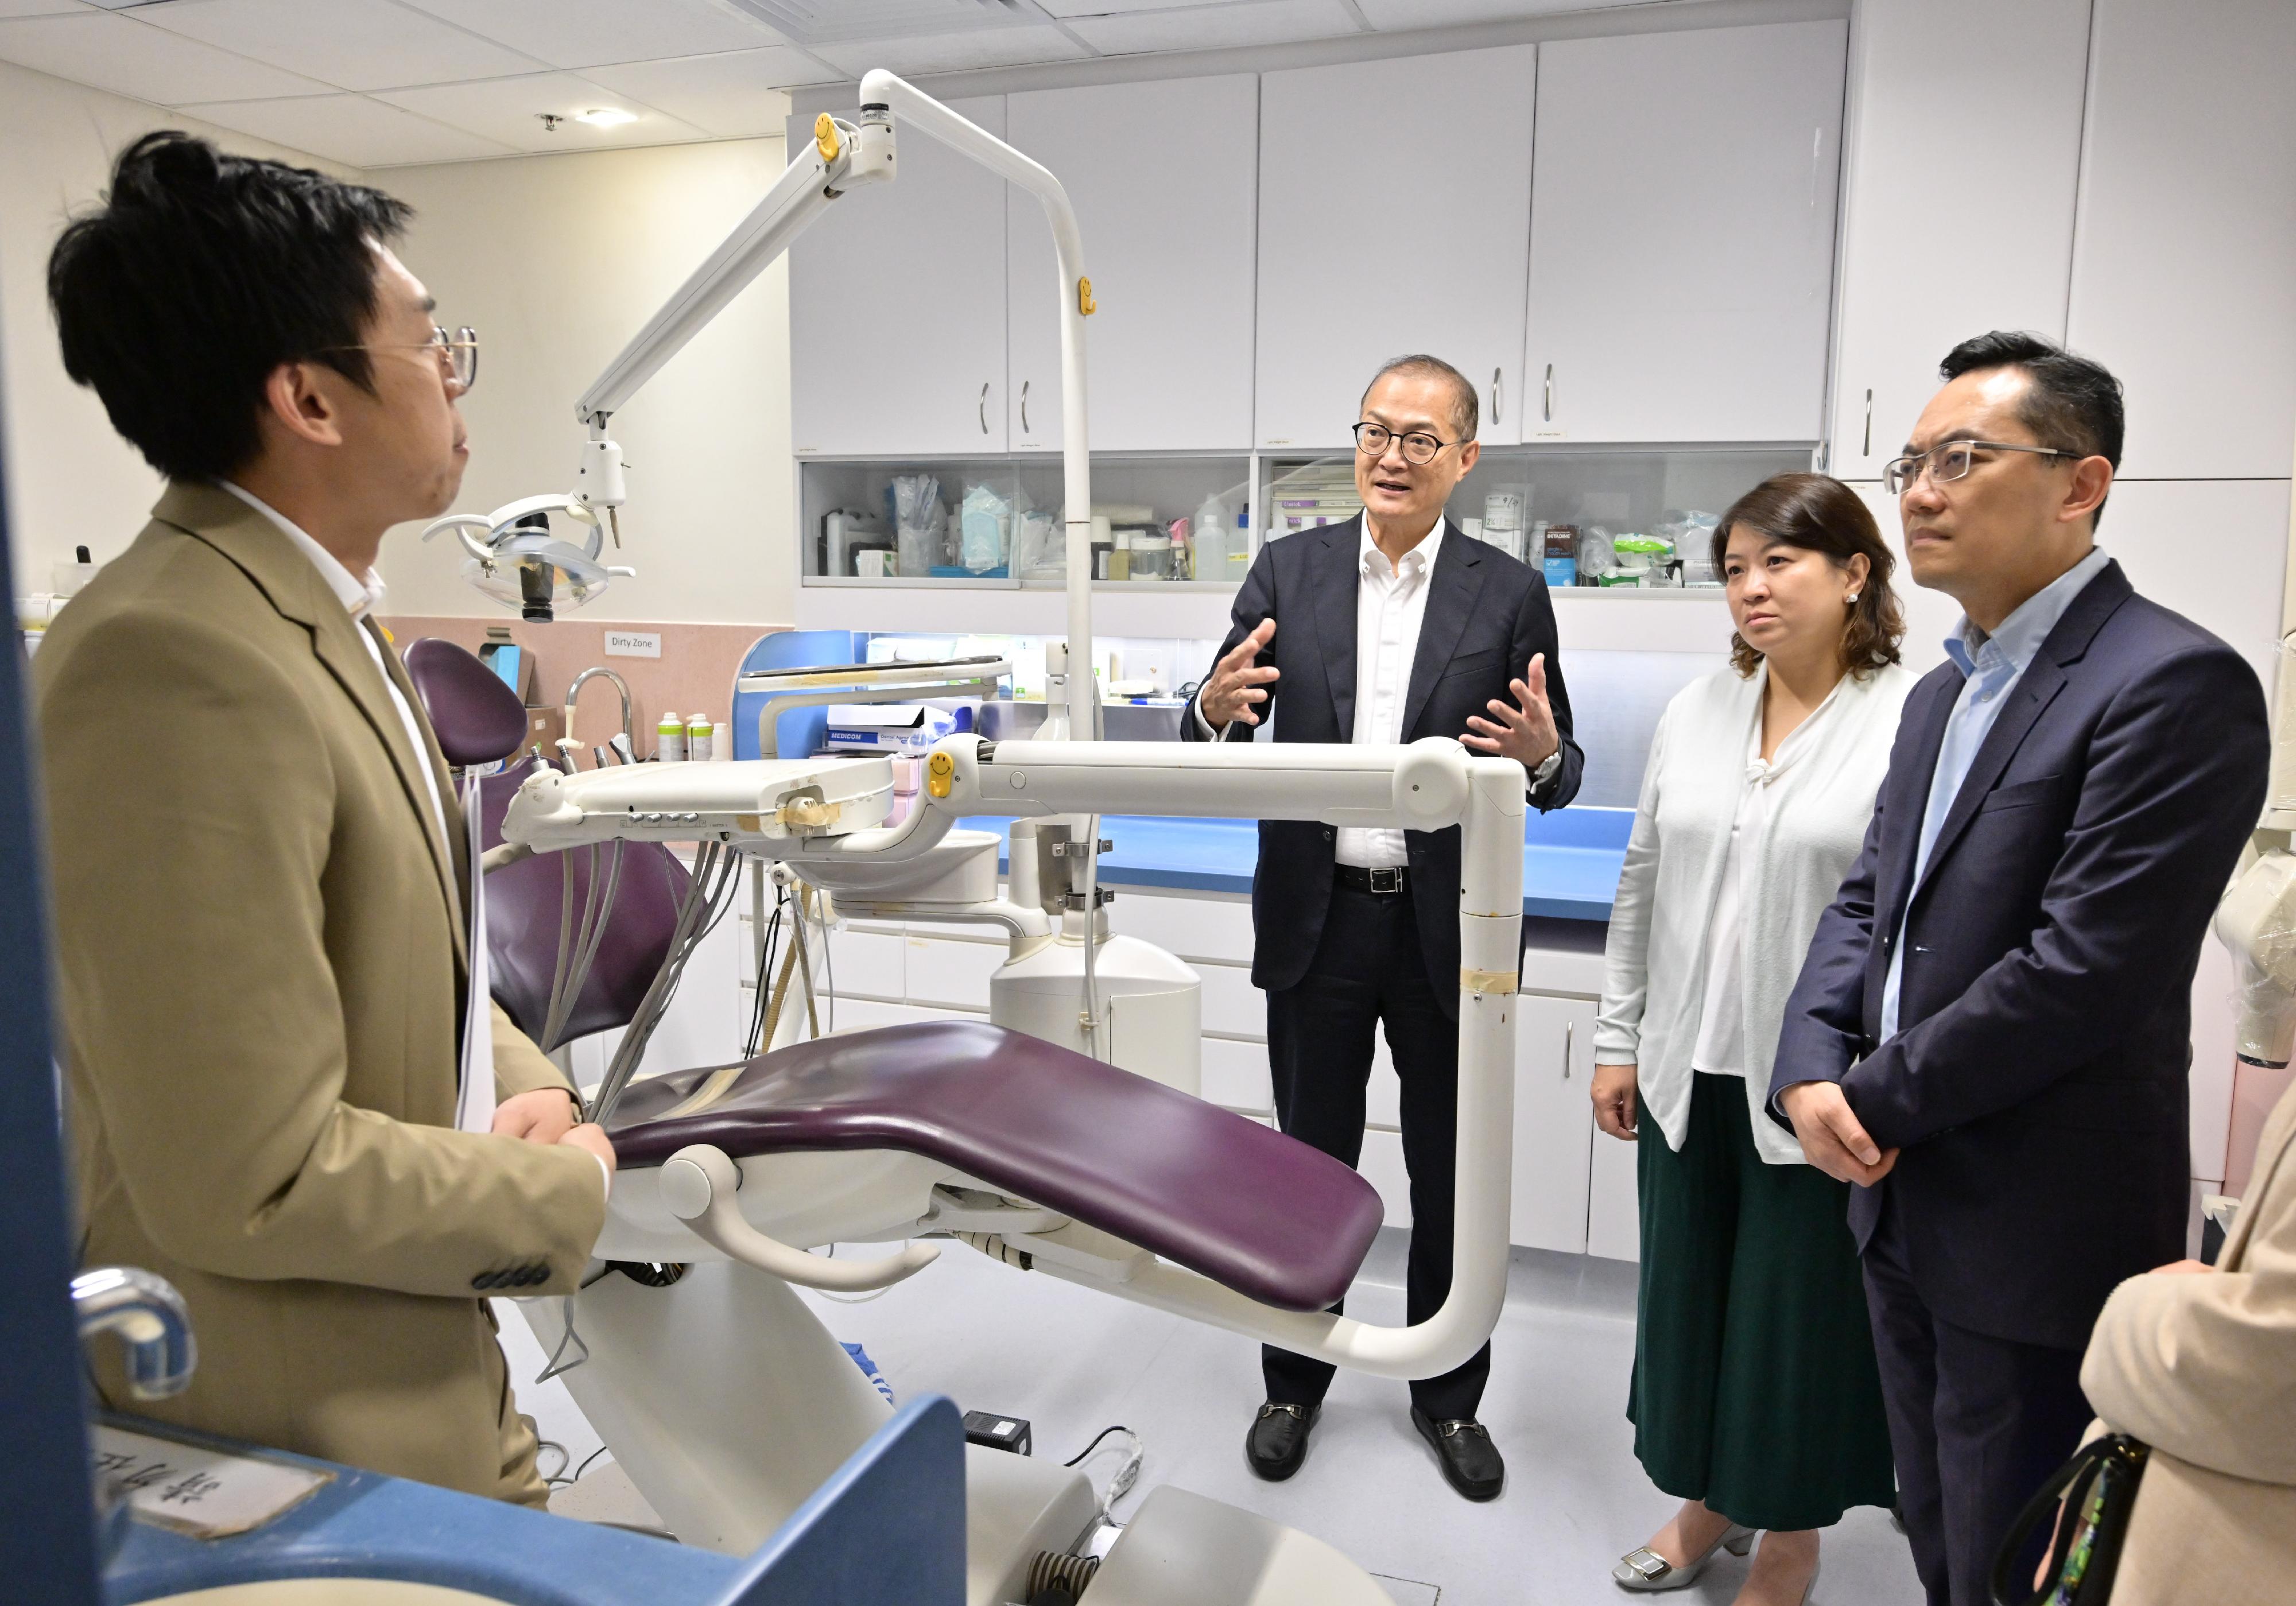 The Secretary for Health, Professor Lo Chung-mau (second left), learns from a staff member of the Kwai Chung Hospital Dental Clinic the special care dental services provided to psychiatric inpatients this afternoon (November 3). Looking on are the Under Secretary for Health, Dr Libby Lee (second right), and the Director of Health, Dr Ronald Lam (first right).